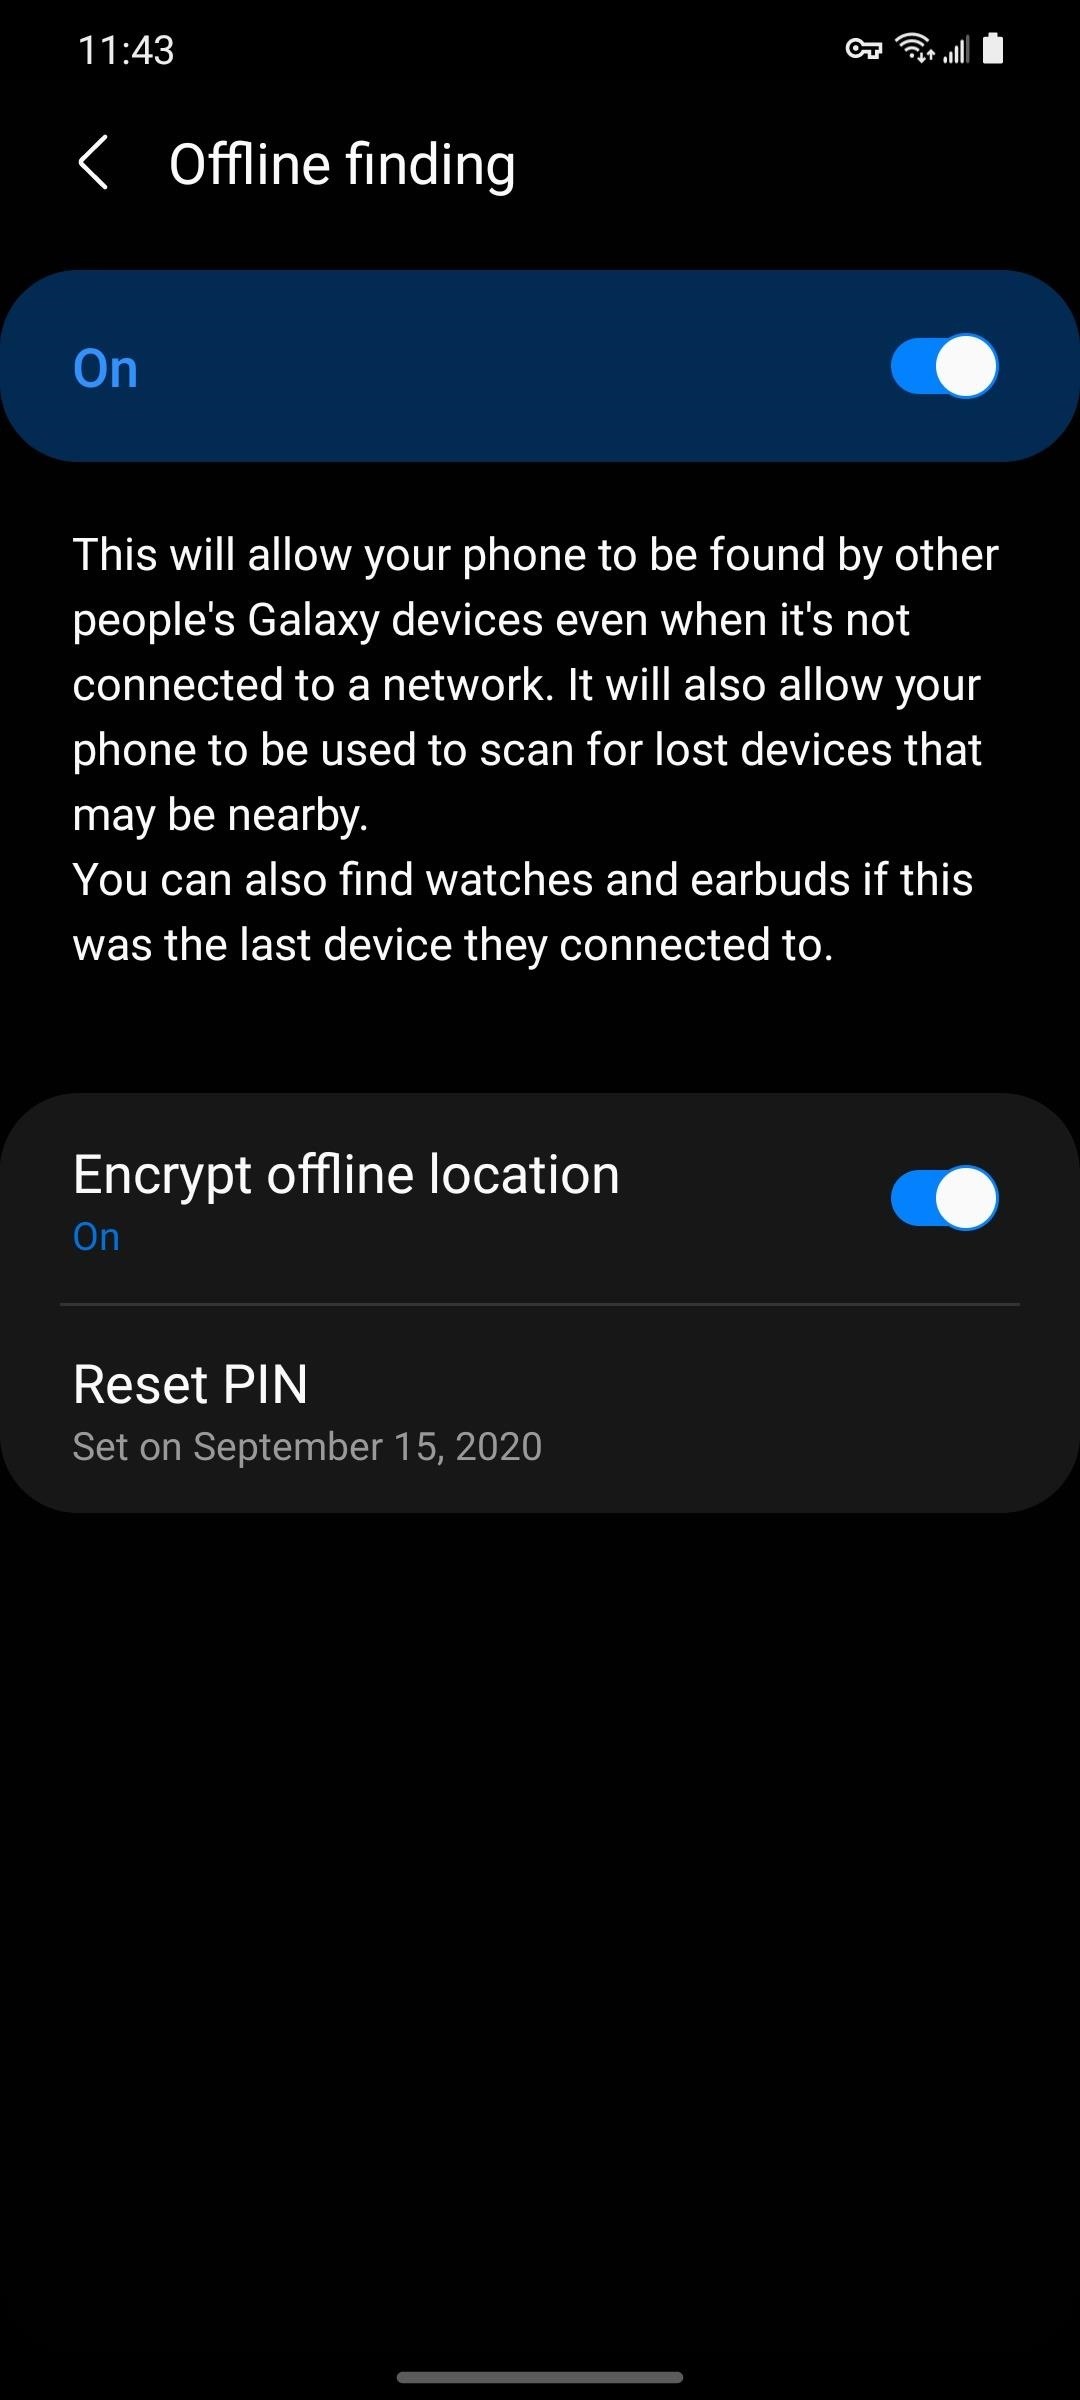 How to Enable Offline Finding on Your Galaxy So You Can Locate Your Phone in Airplane Mode